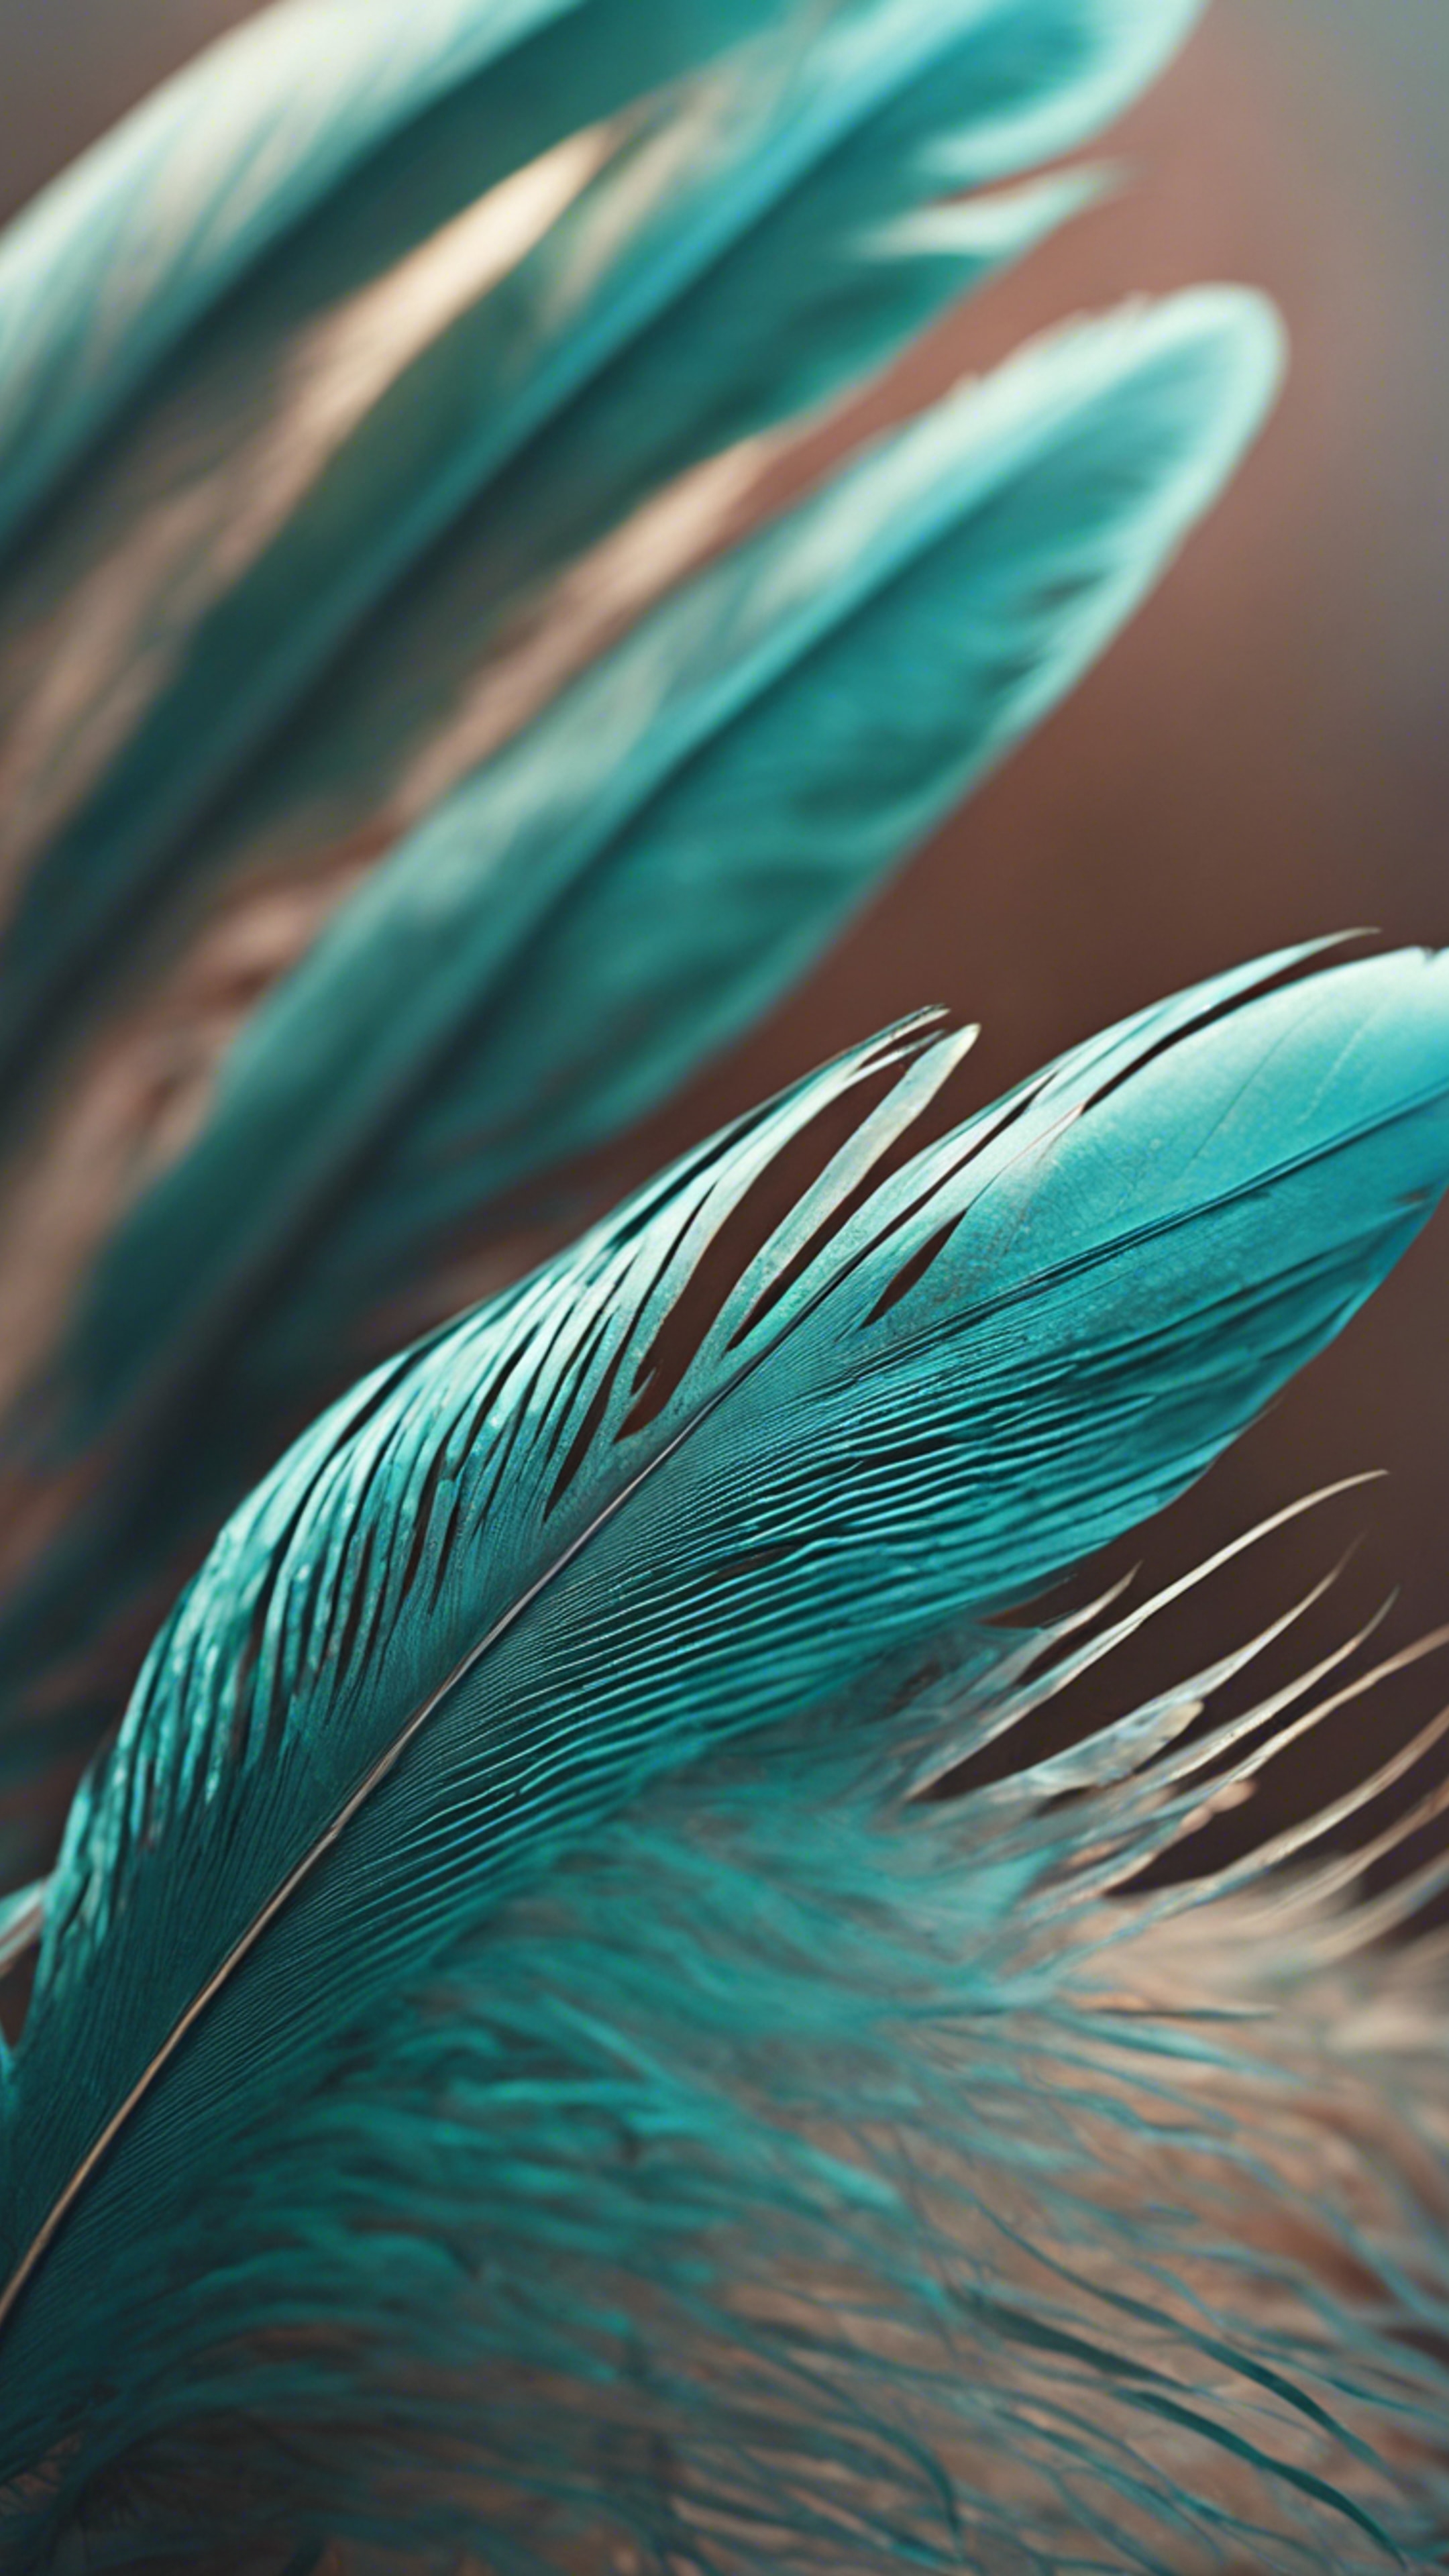 A close-up view of an exotic cool teal-colored birds' feather. Обои[44d0beeee9f542d4ae1e]